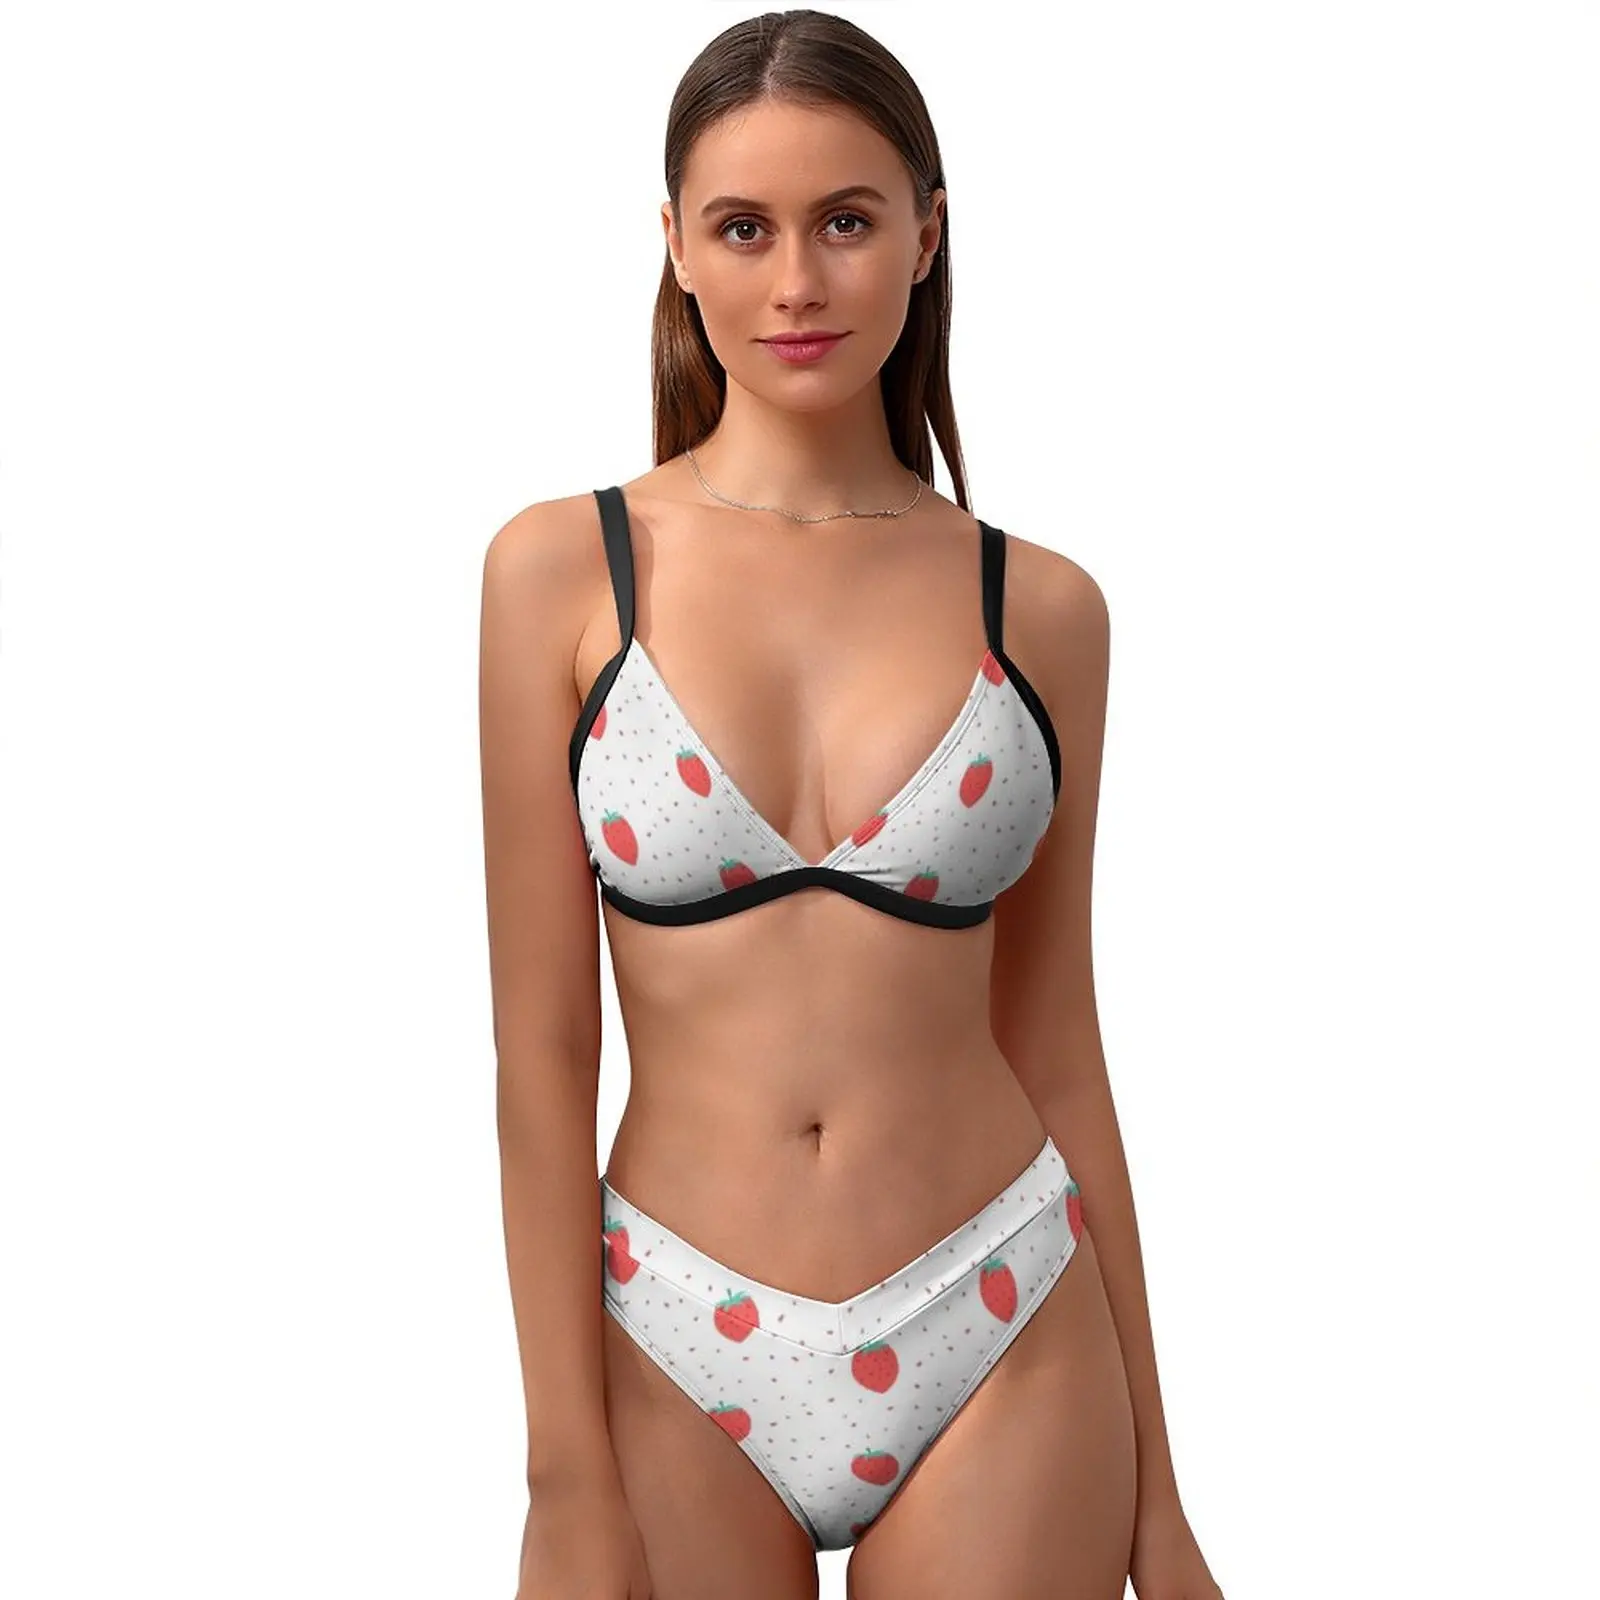 

Strawberry Bikini Swimsuit With Ties Whole Sale Normal Swimwear Pool 2 Piece For Big Breasts Bathing Suit